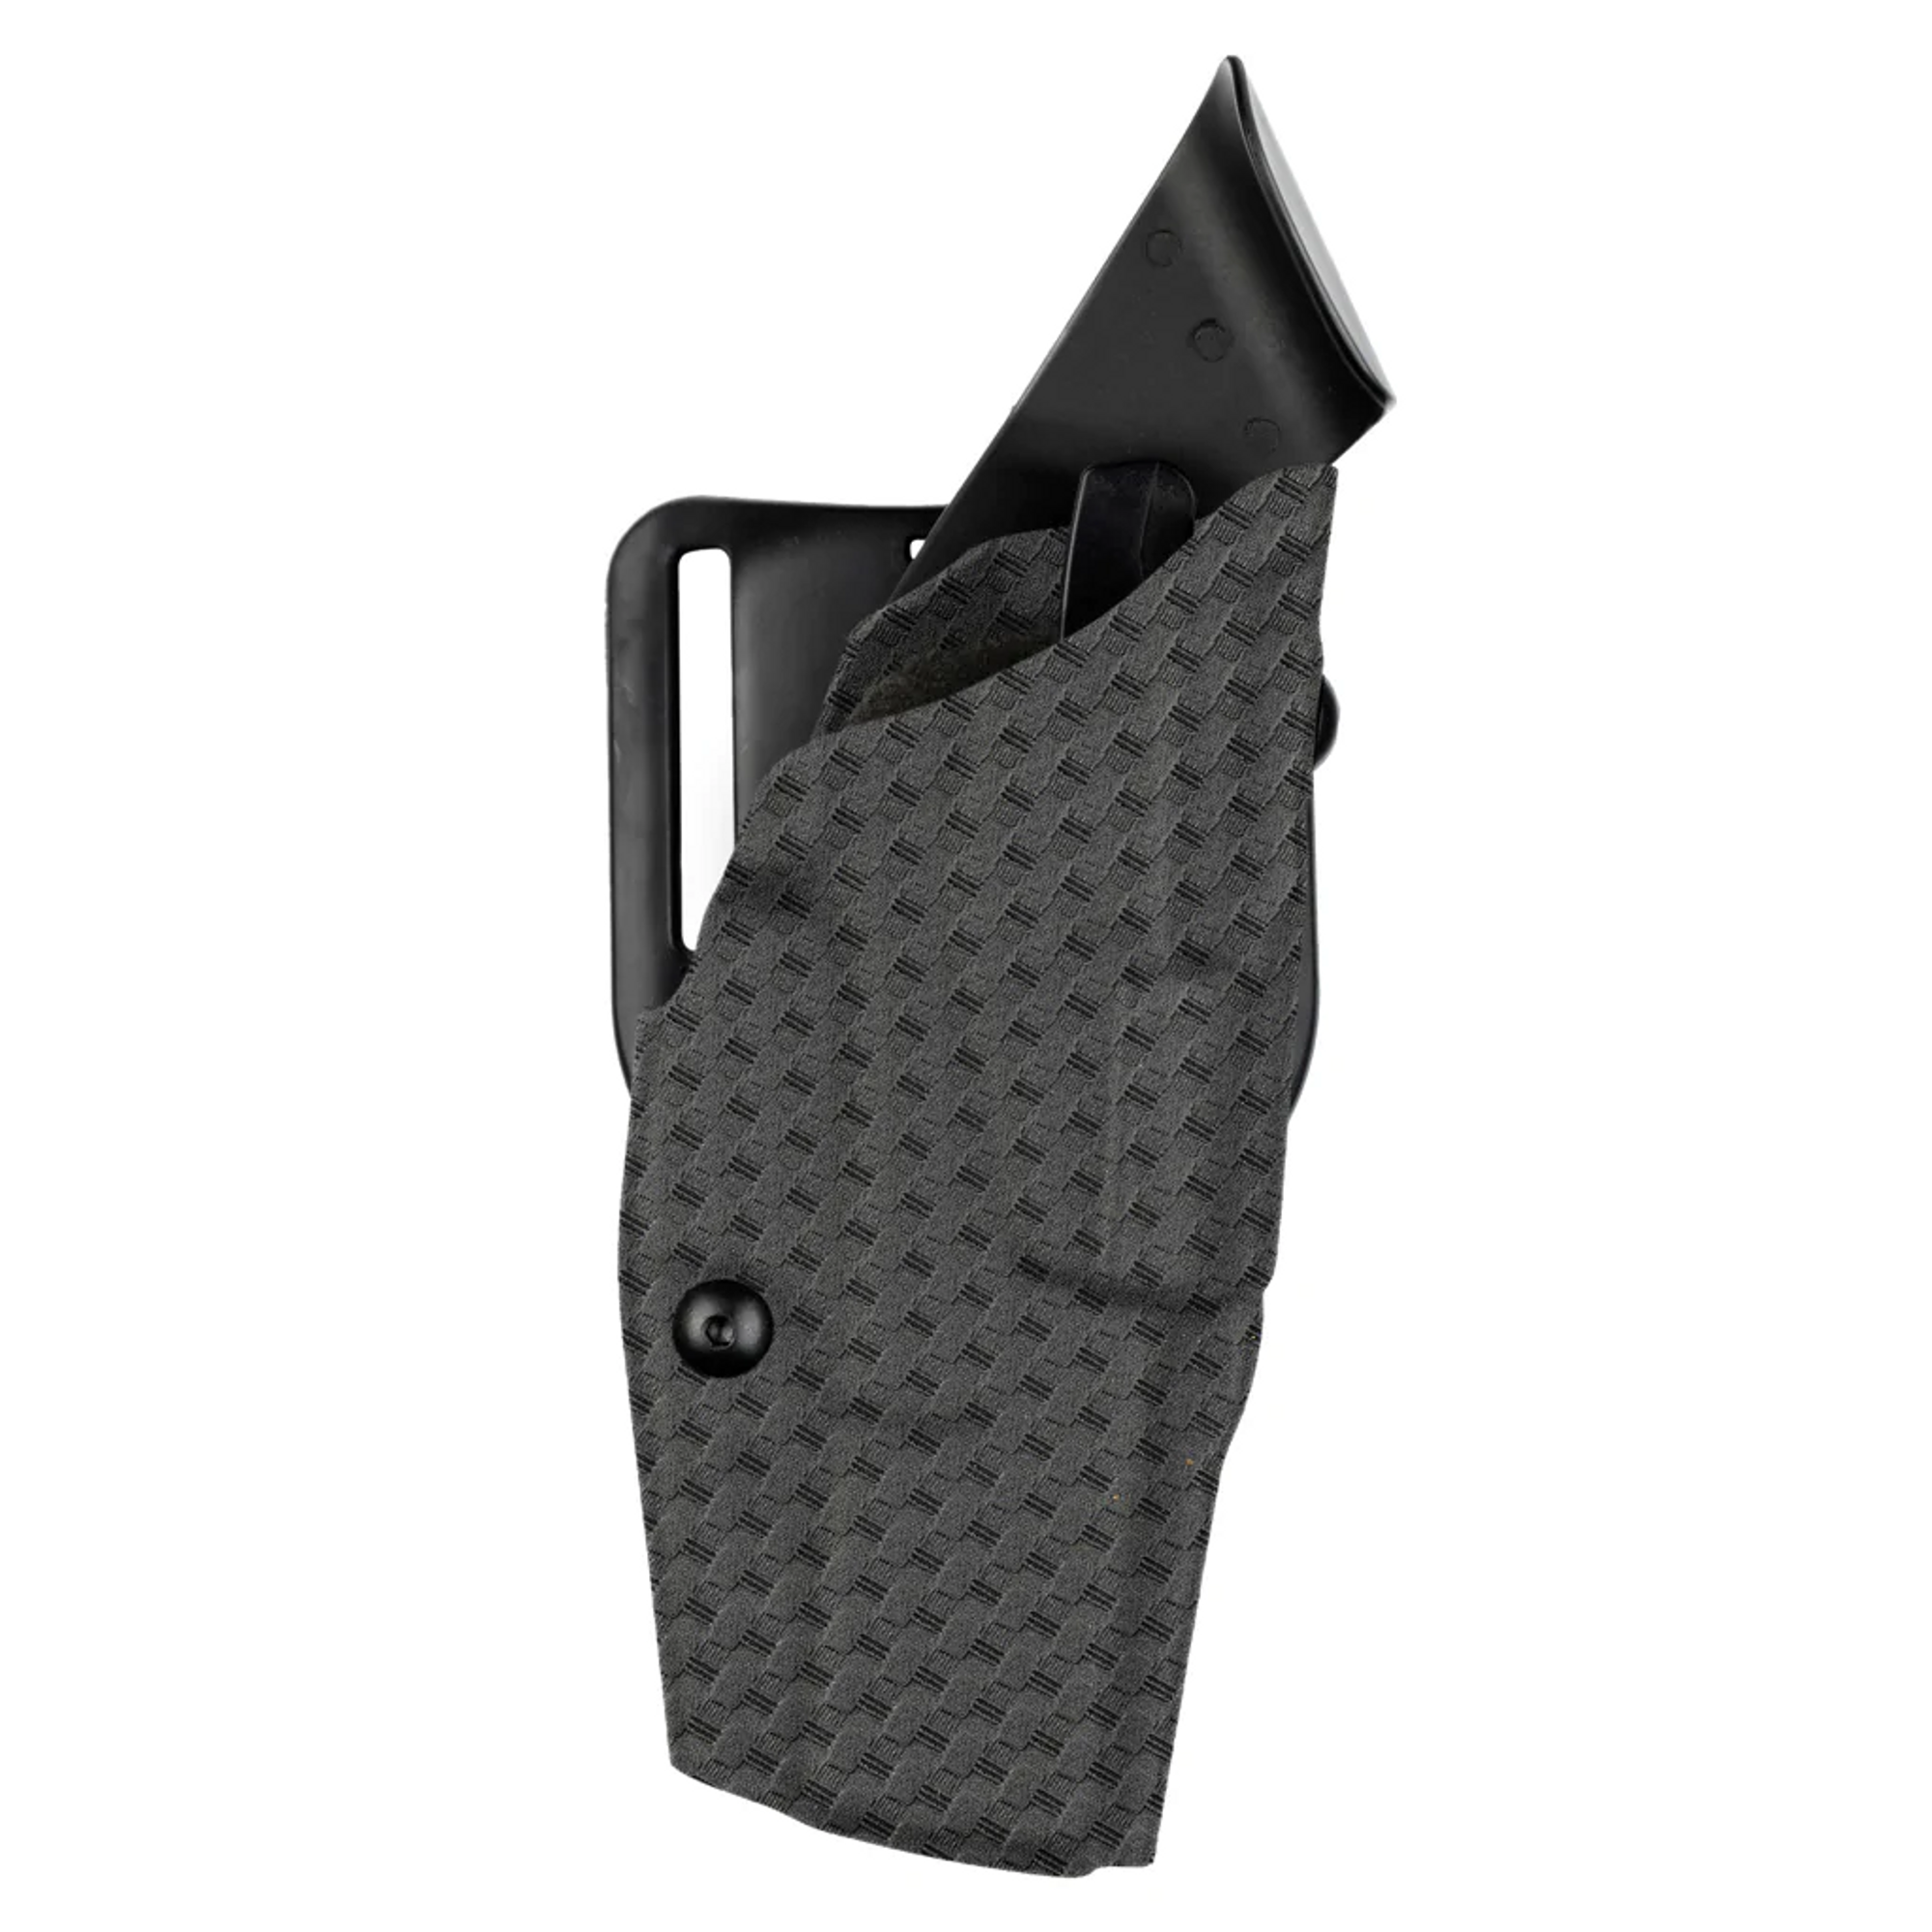 Model 6390 Als Mid-ride Level I Retention Duty Holster For Smith & Wesson M&p 9 W/ Light - KR6390-2192-482